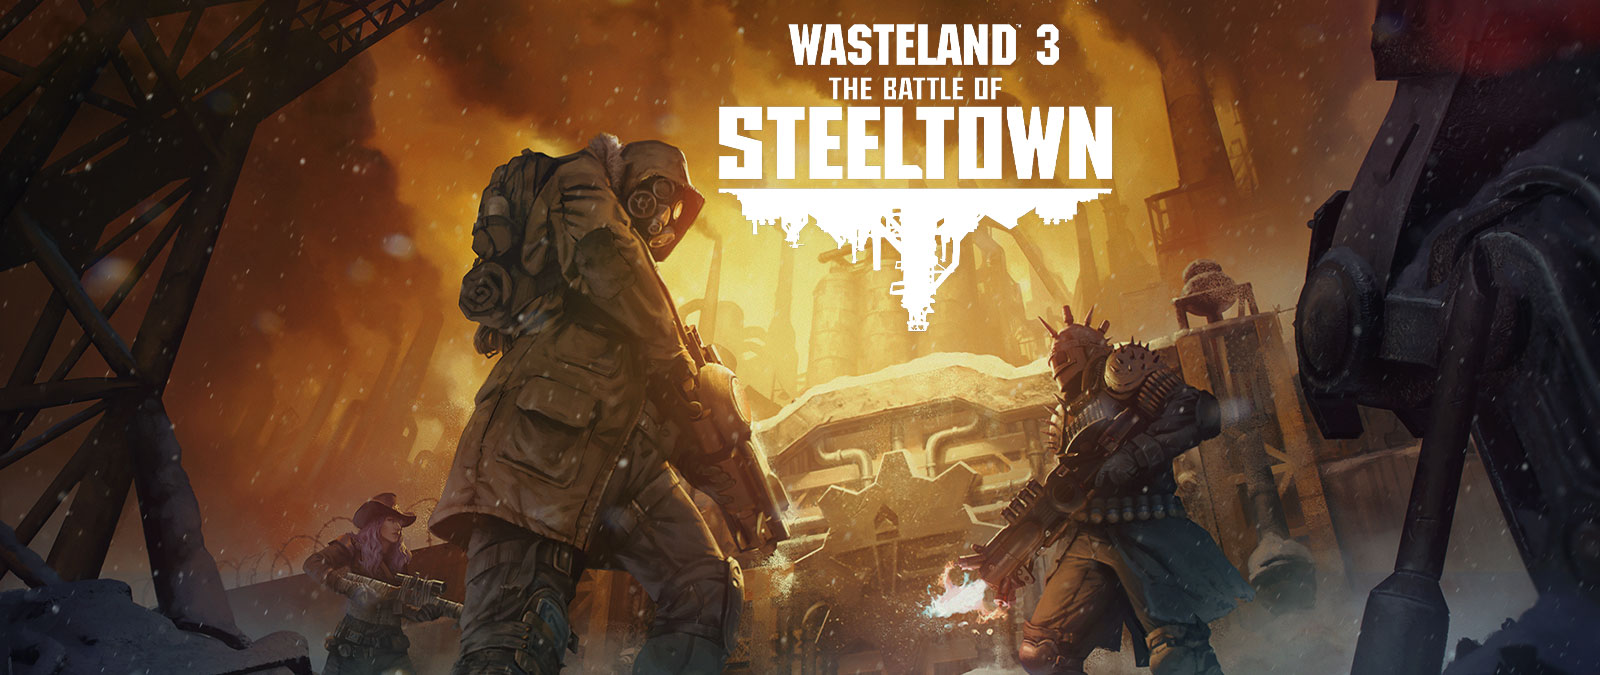 Wasteland 3: The Battle of Steeltown. Three characters with weapons and armor in front of a door with an industrial background